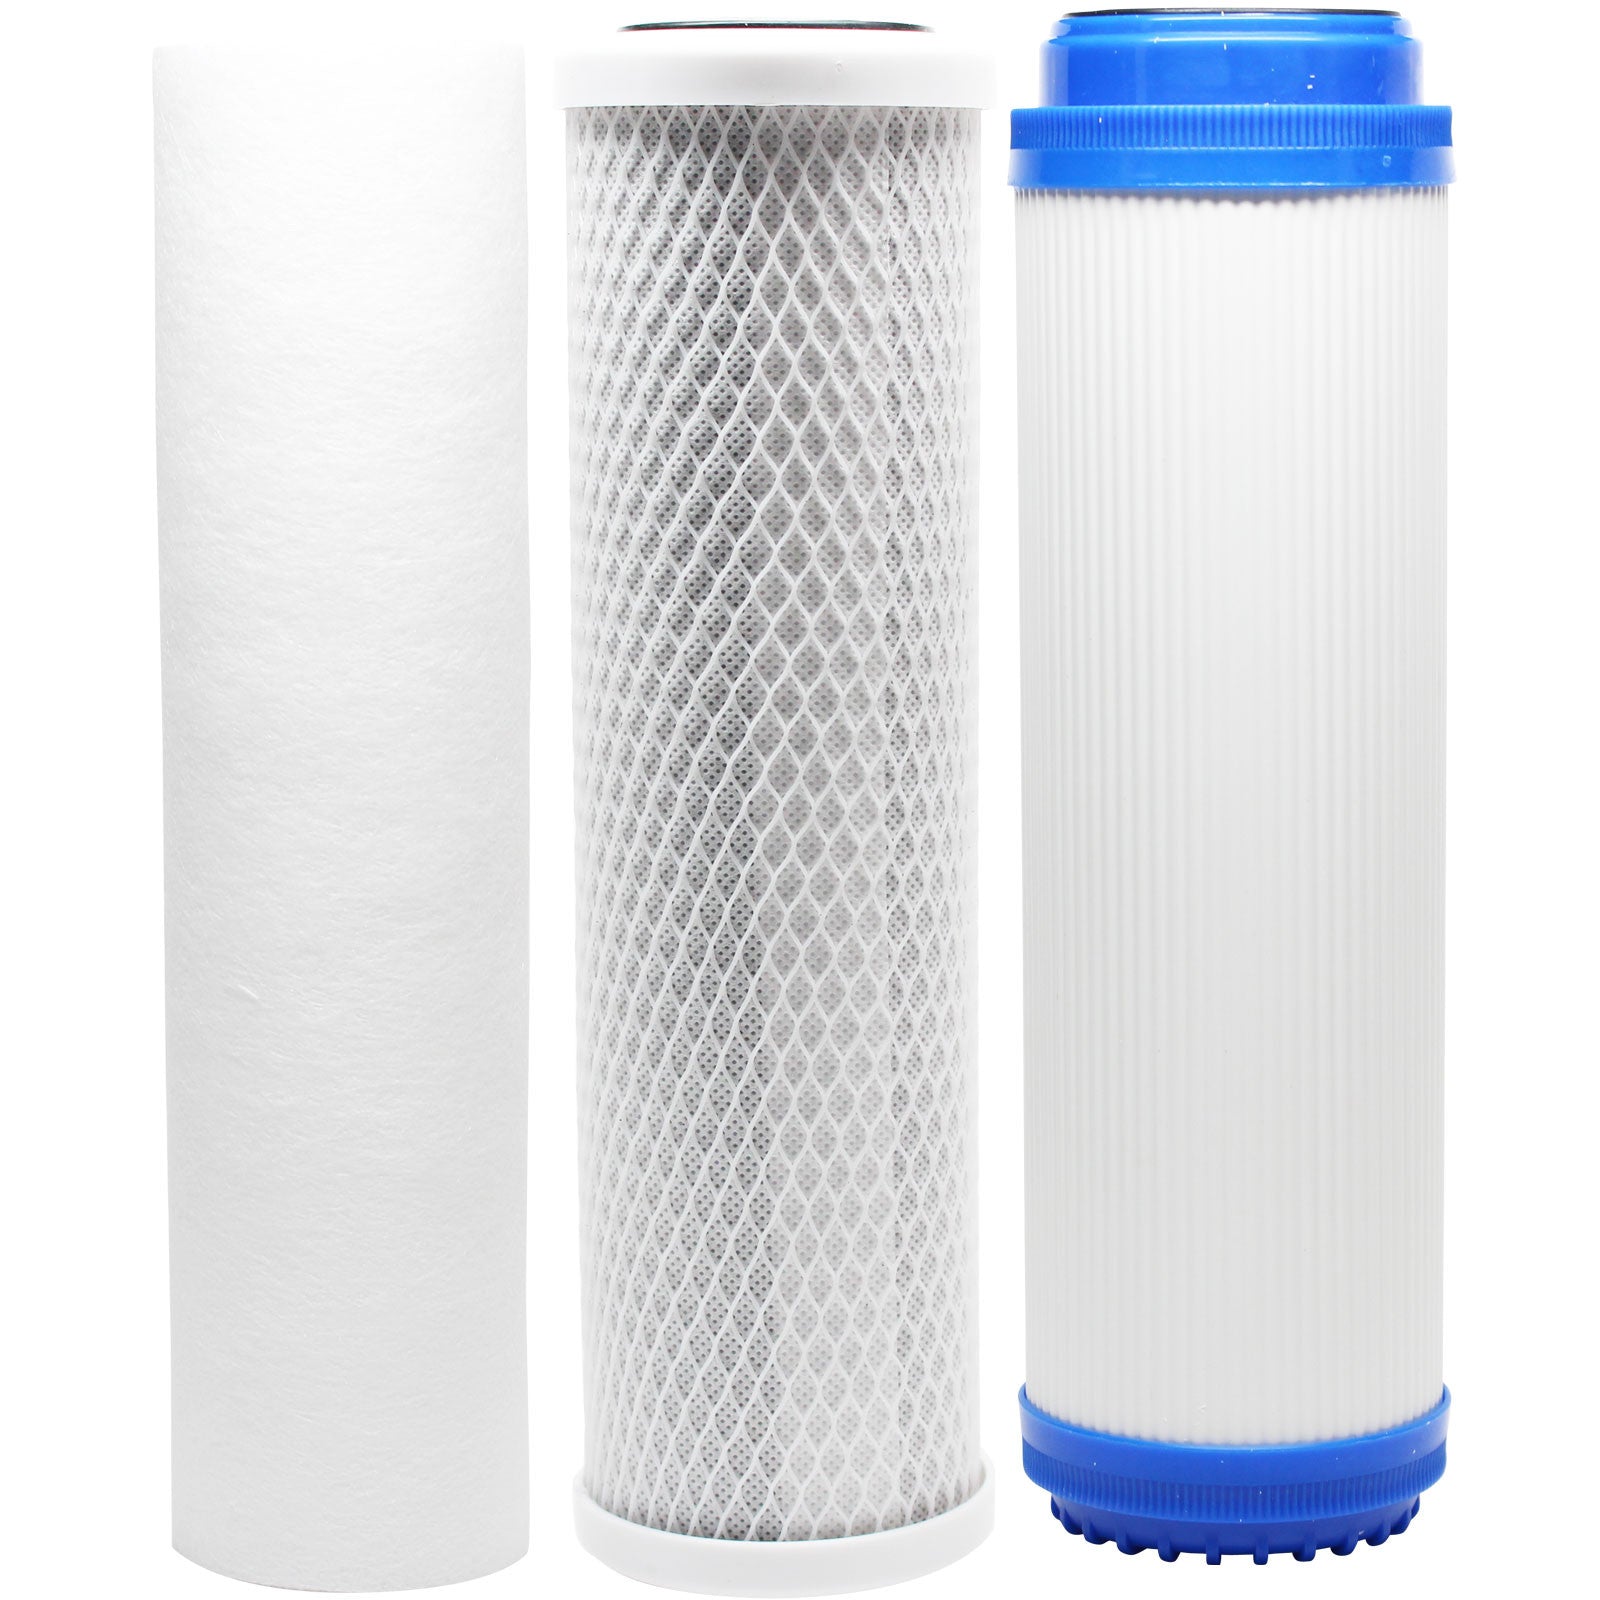 Replacement Filter Kit for Hydronix HF3-10CLWH12PR RO System - Includes Carbon Block Filter, PP Sediment Filter & GAC Filter